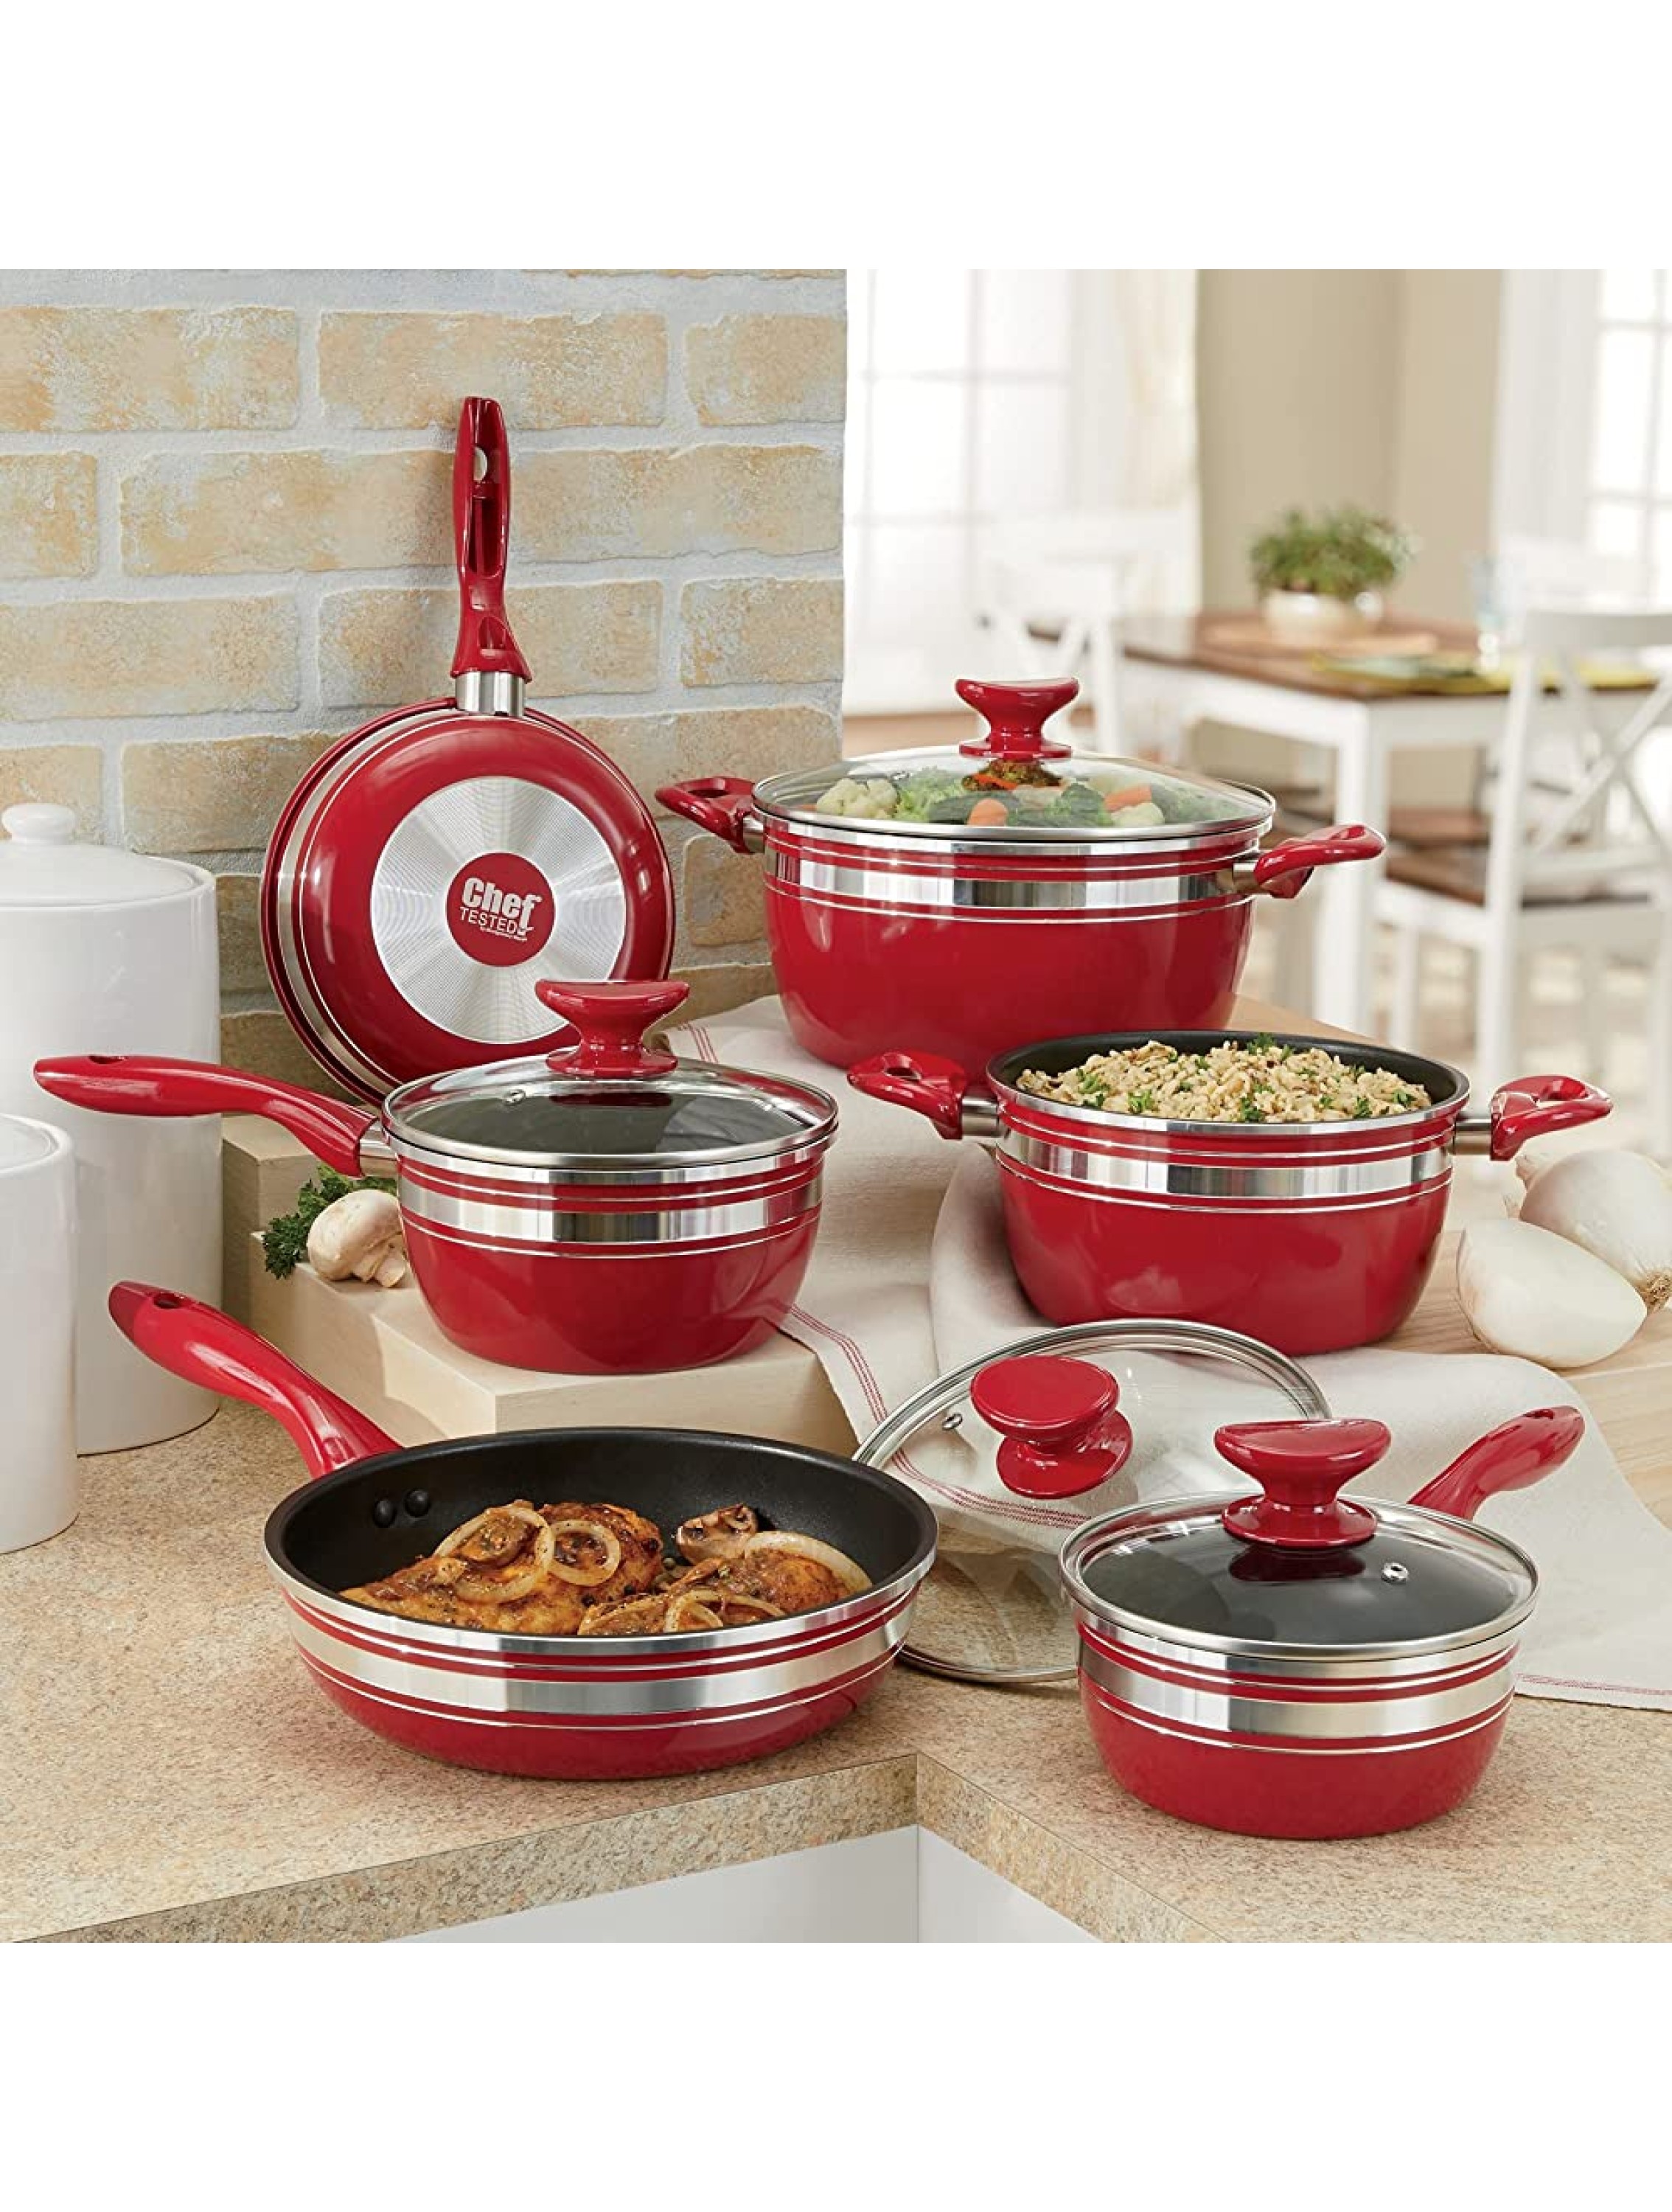 10-Piece Chef Tested Banded Cookware Set Red from Montgomery Ward - BZG7F5GNJ